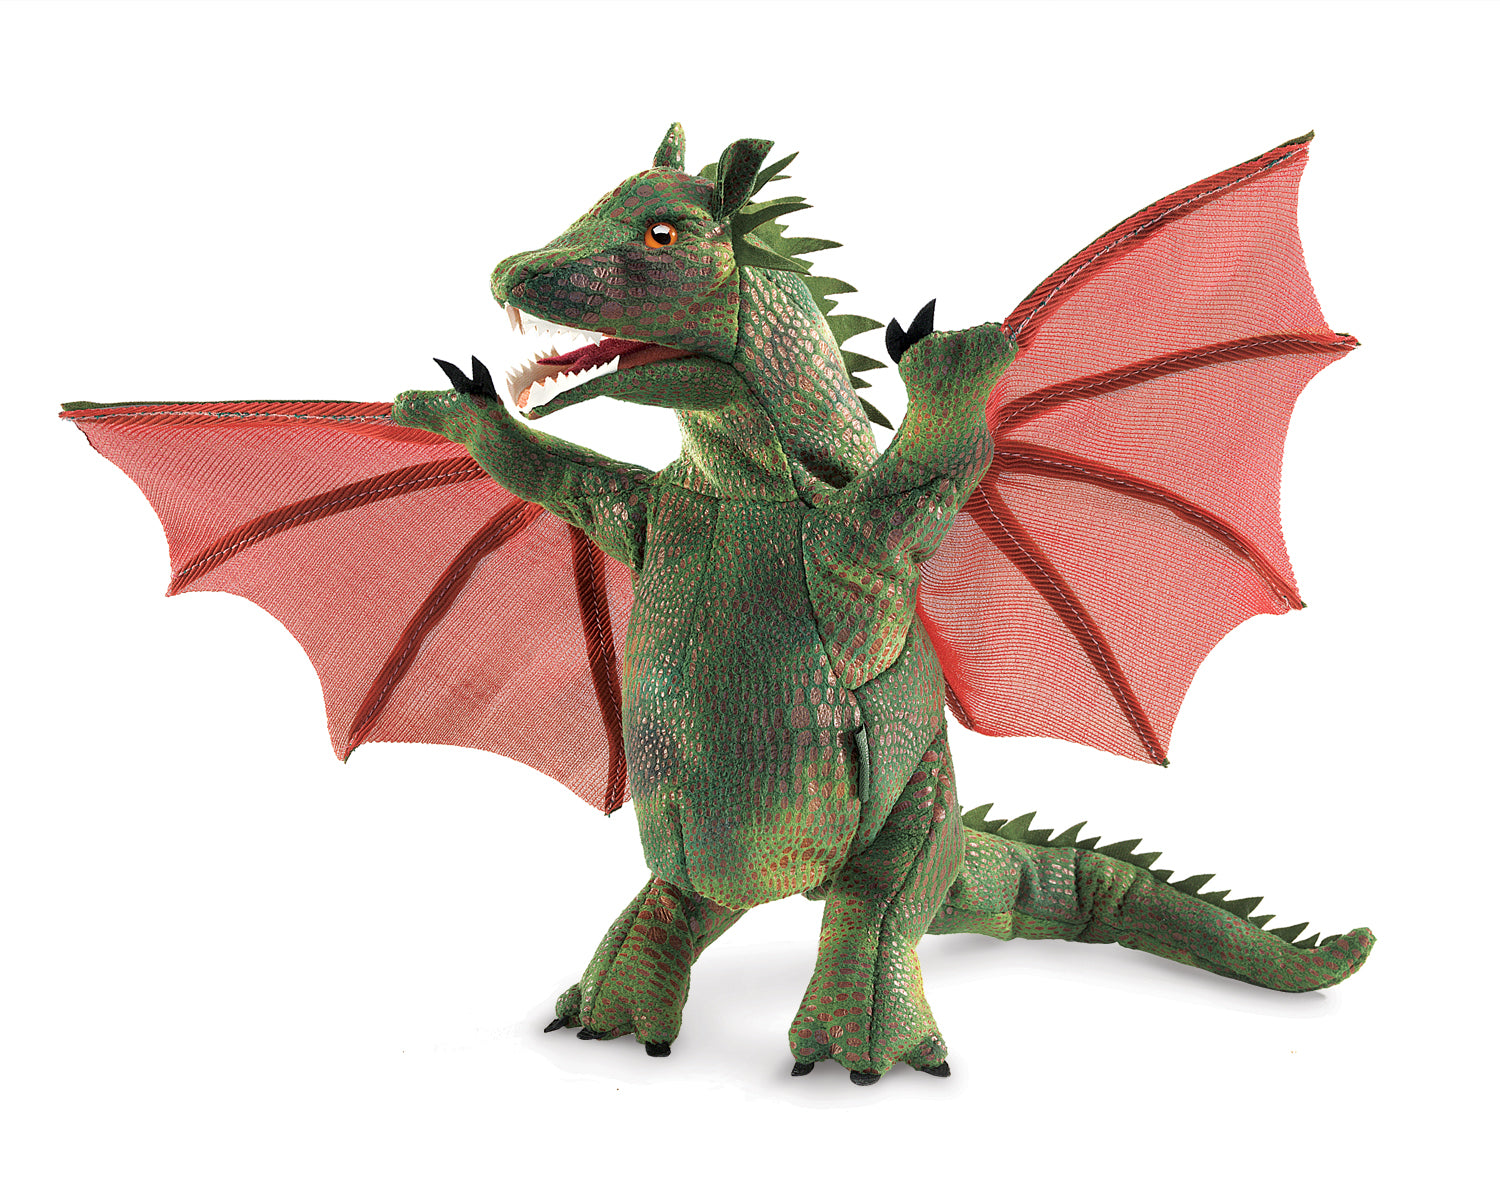 Green dragon with red scales in standing position. Red wings on puppet are extended. 